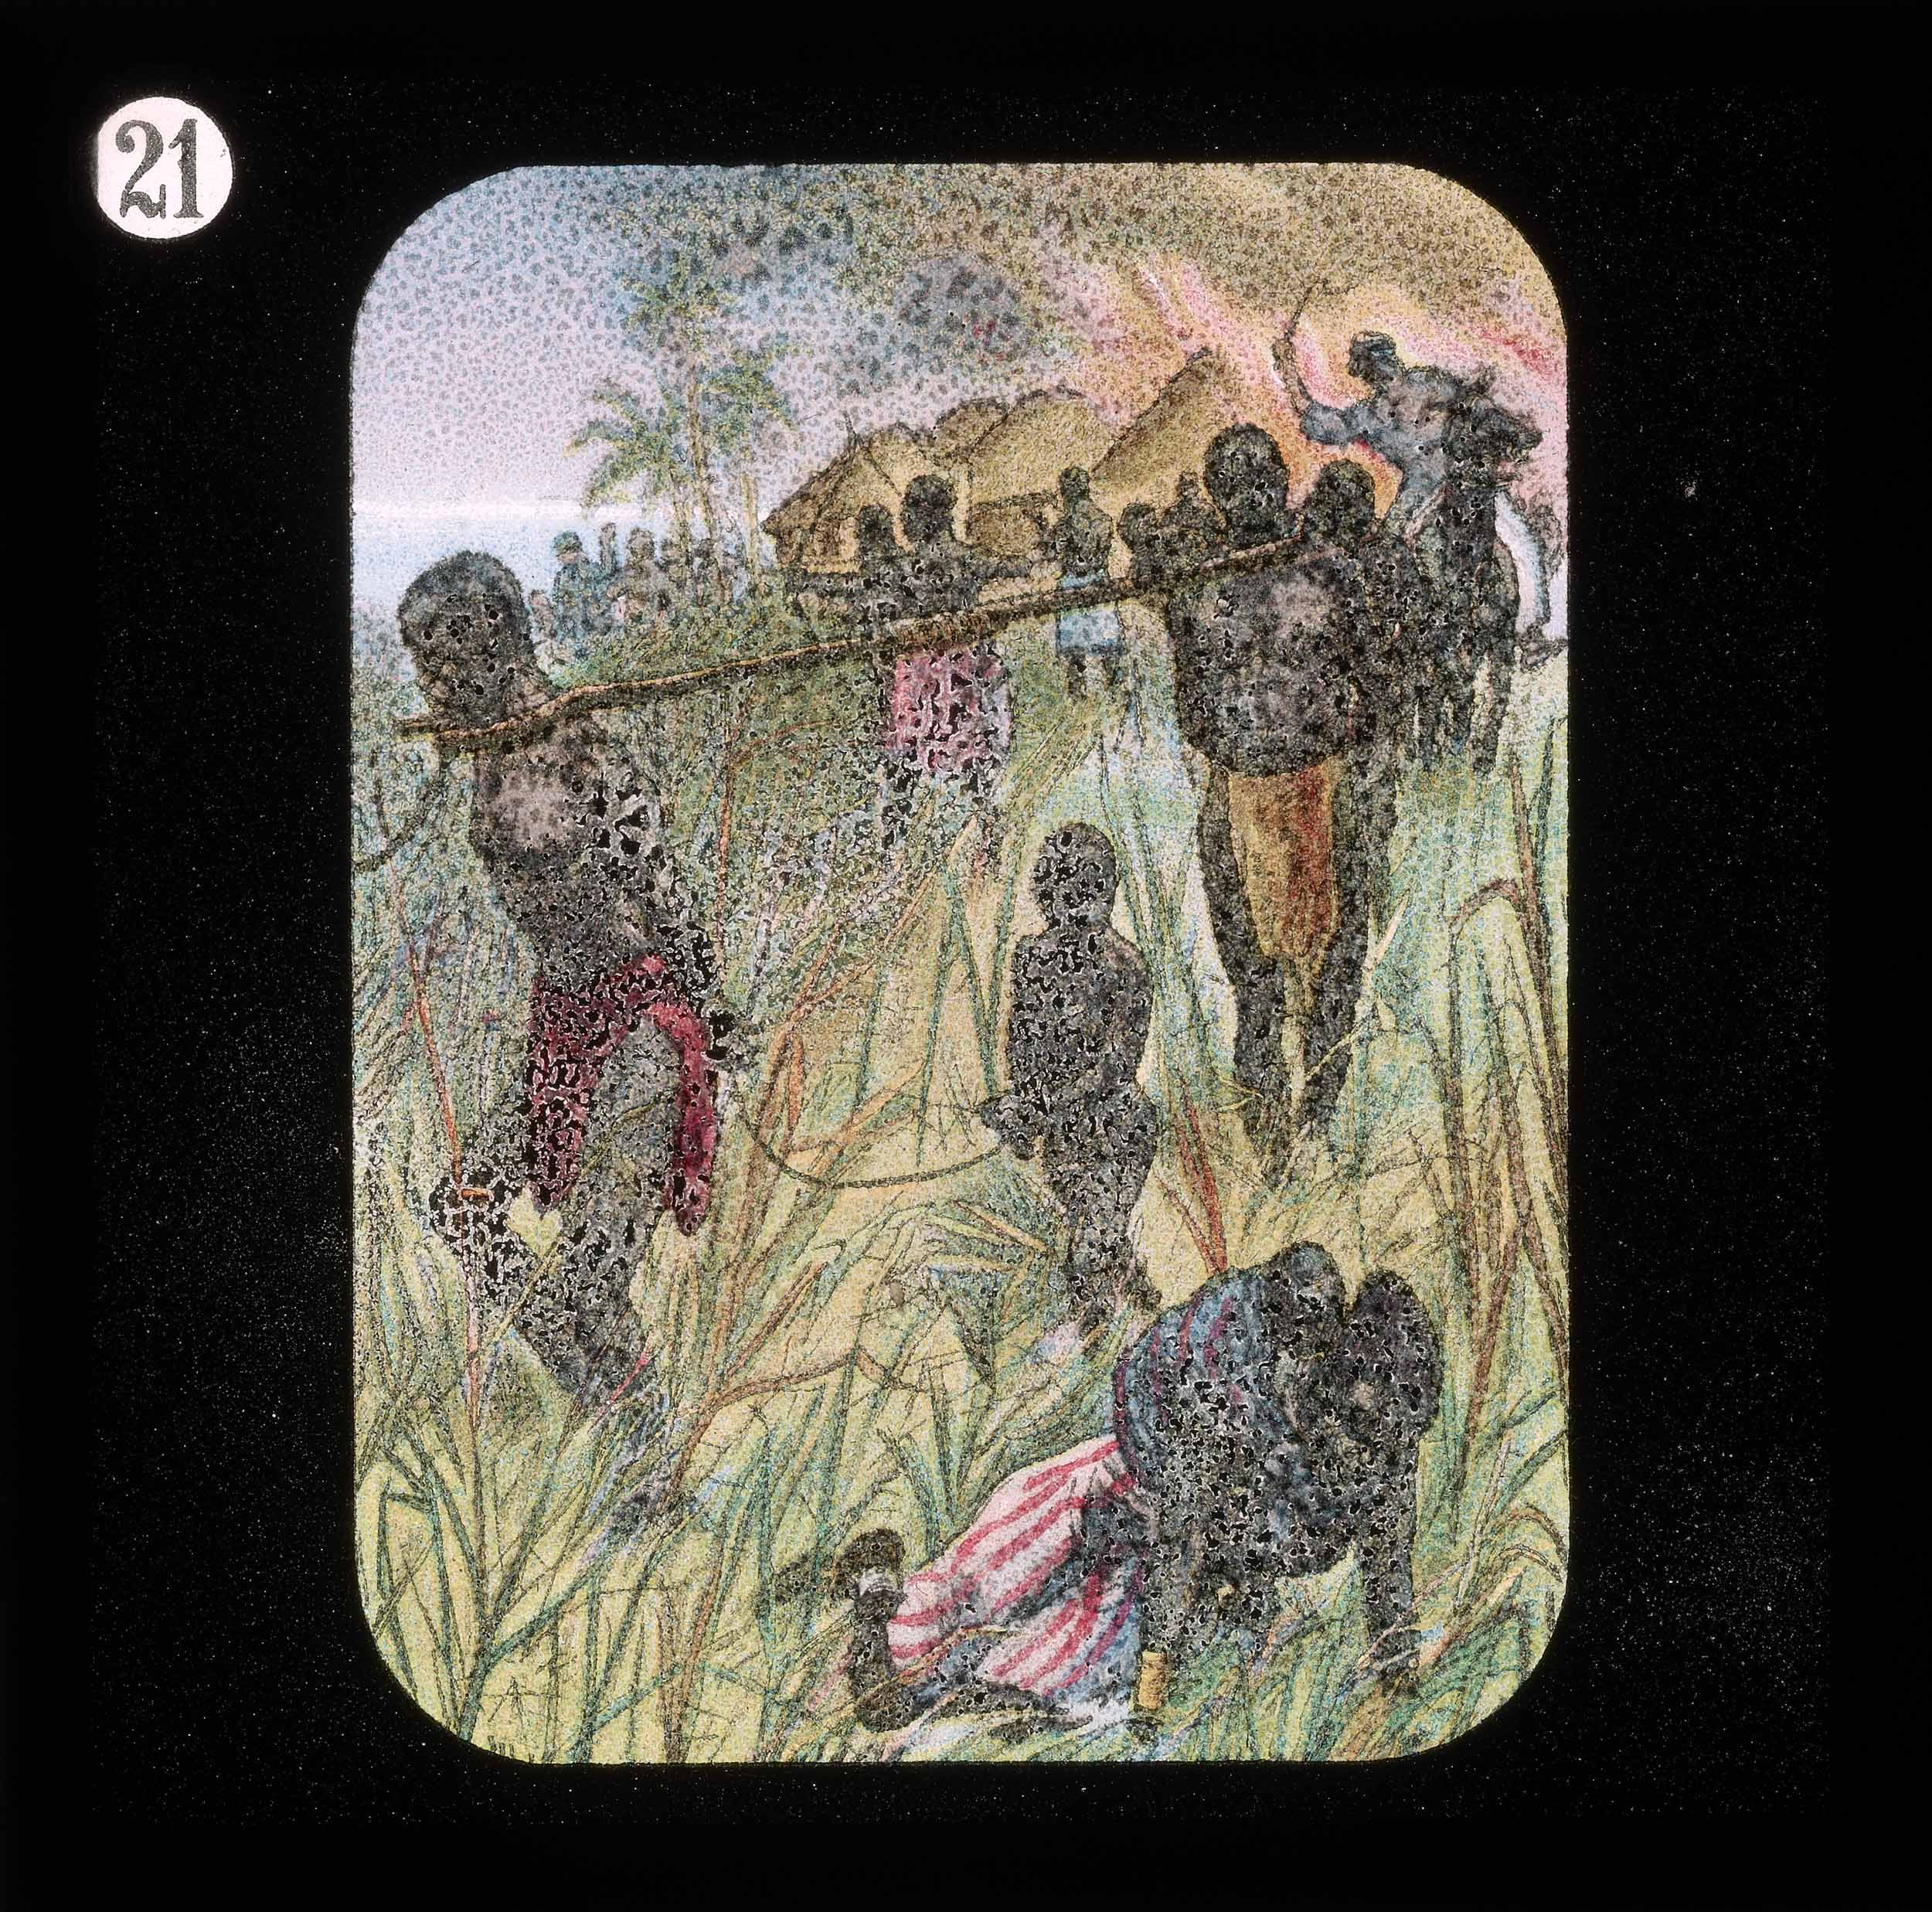 Lantern Slides of the Life, Adventures, and Work of David Livingstone. Courtesy of the Smithsonian Libraries, Washington, D.C..